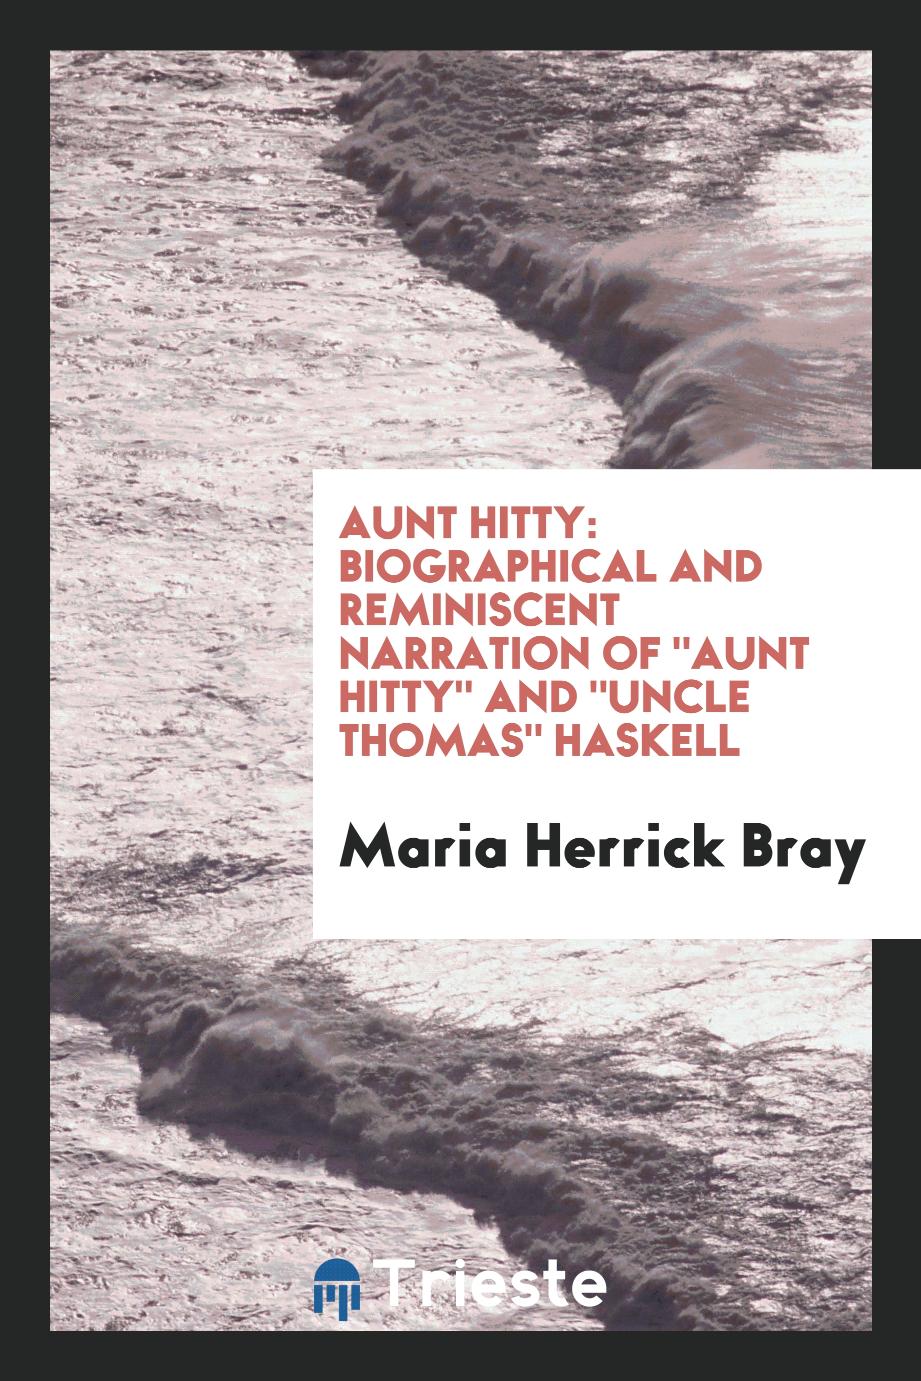 Aunt Hitty: Biographical and Reminiscent Narration of "Aunt Hitty" and "Uncle Thomas" Haskell